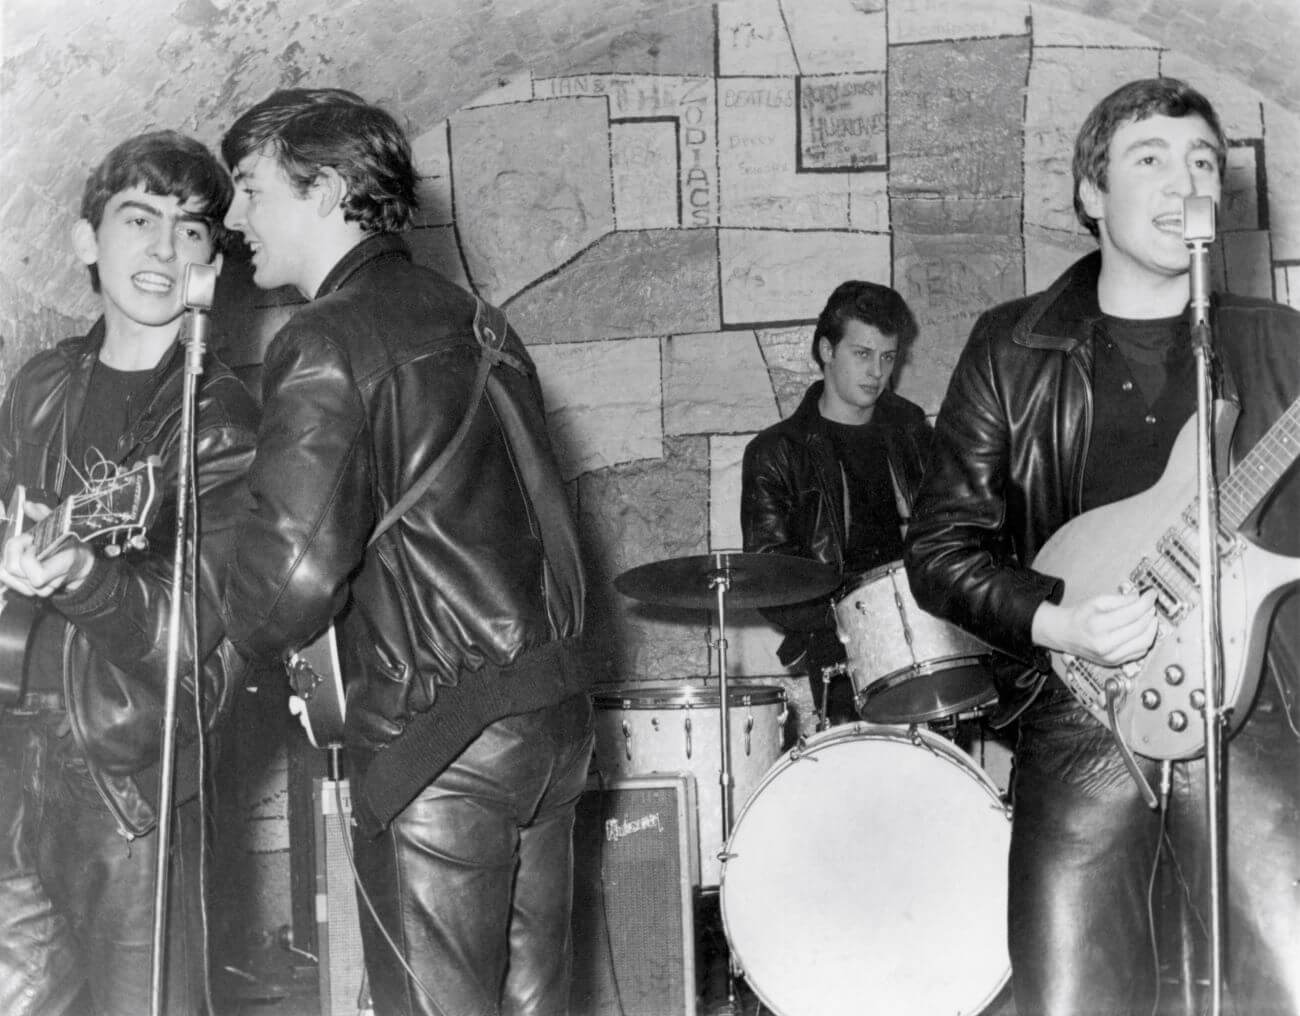 A black and white picture of George Harrison, Paul McCartney, Pete Best, and John Lennon performing together.